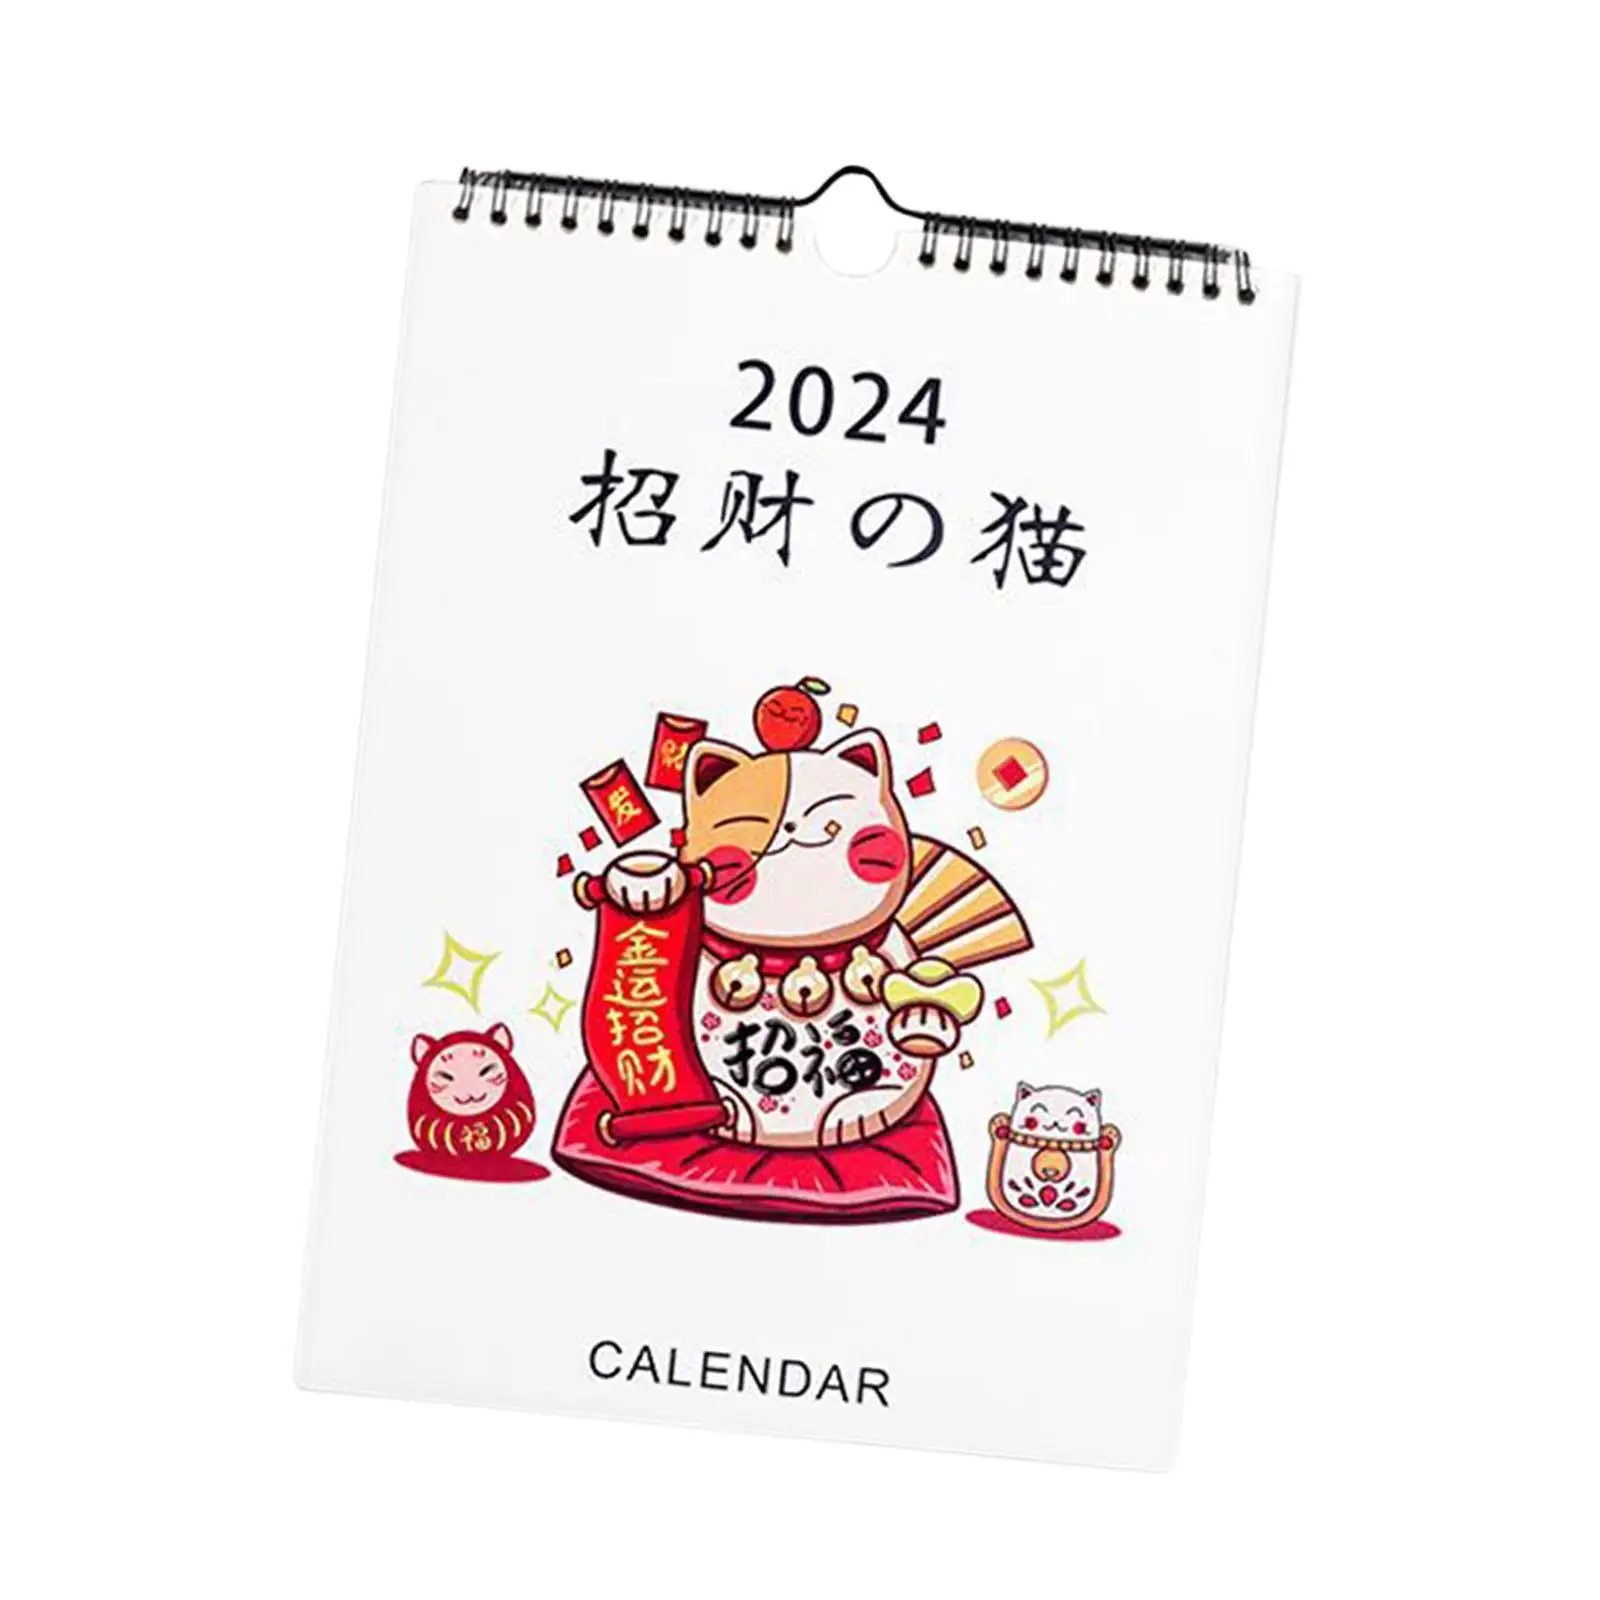 Coil Wall Calendar Sept 2023 - DEC 2024 Hanging Hanging Hook Monthly Calendar for Business New Year Holiday School Office